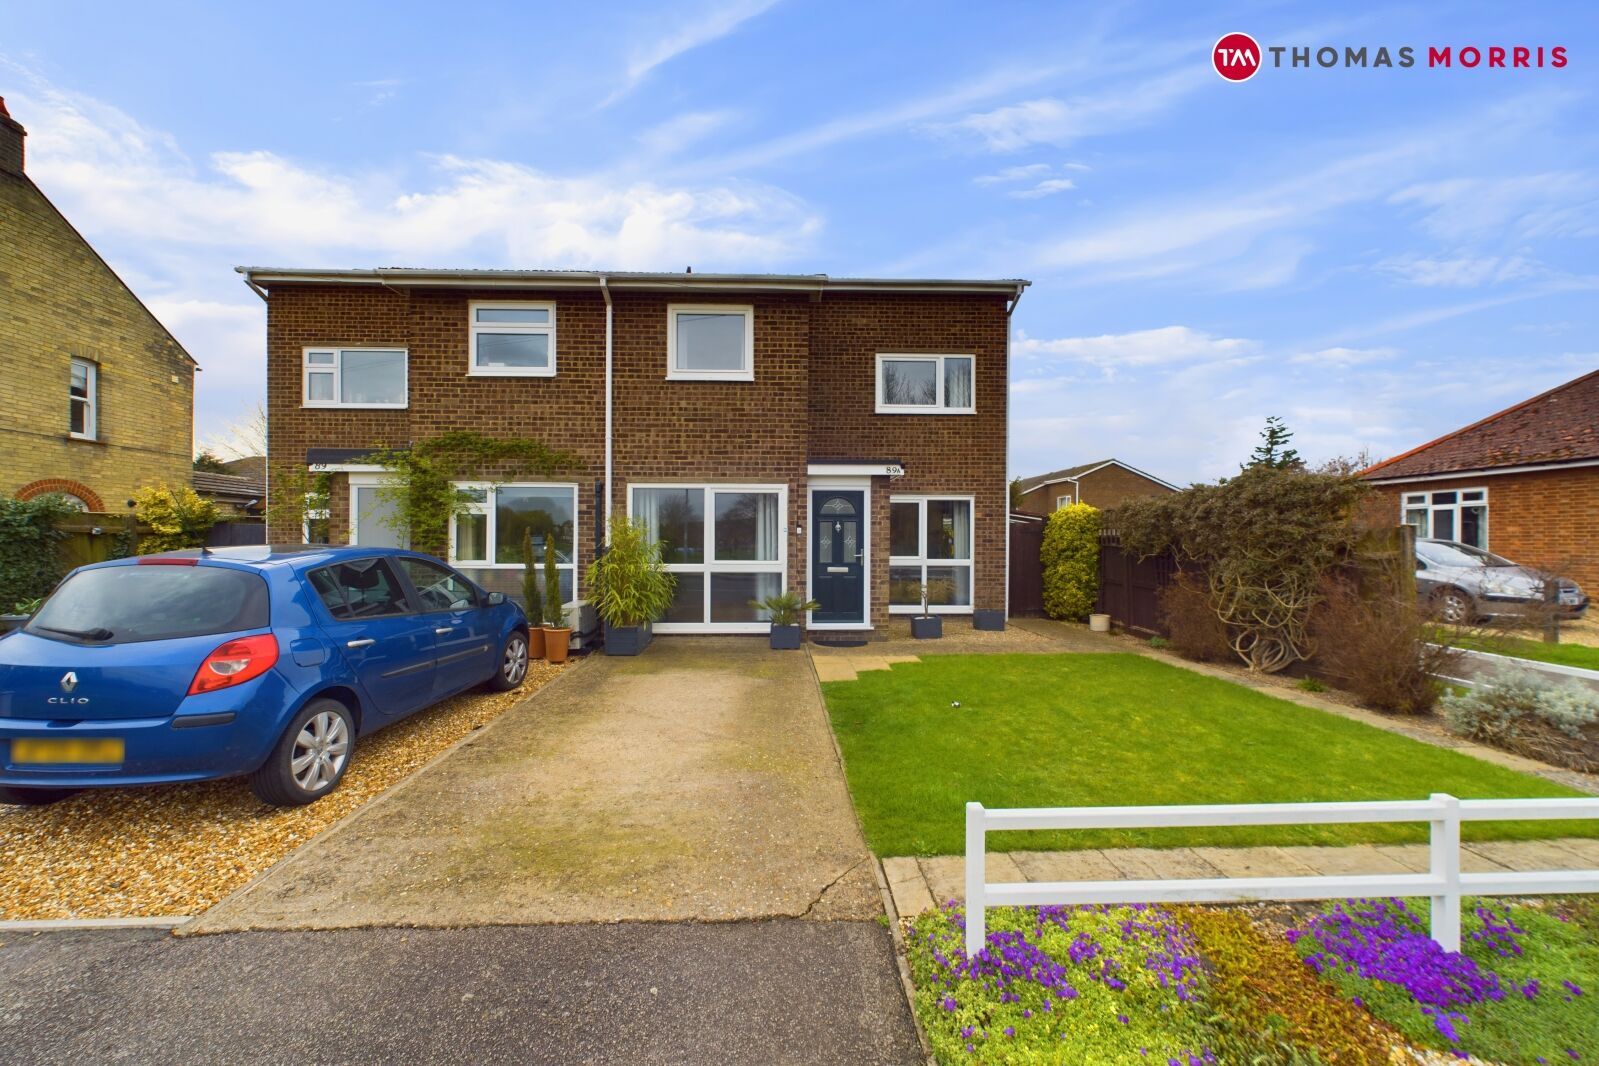 3 bedroom semi detached house for sale Crosshall Road, Eaton Ford, PE19, main image